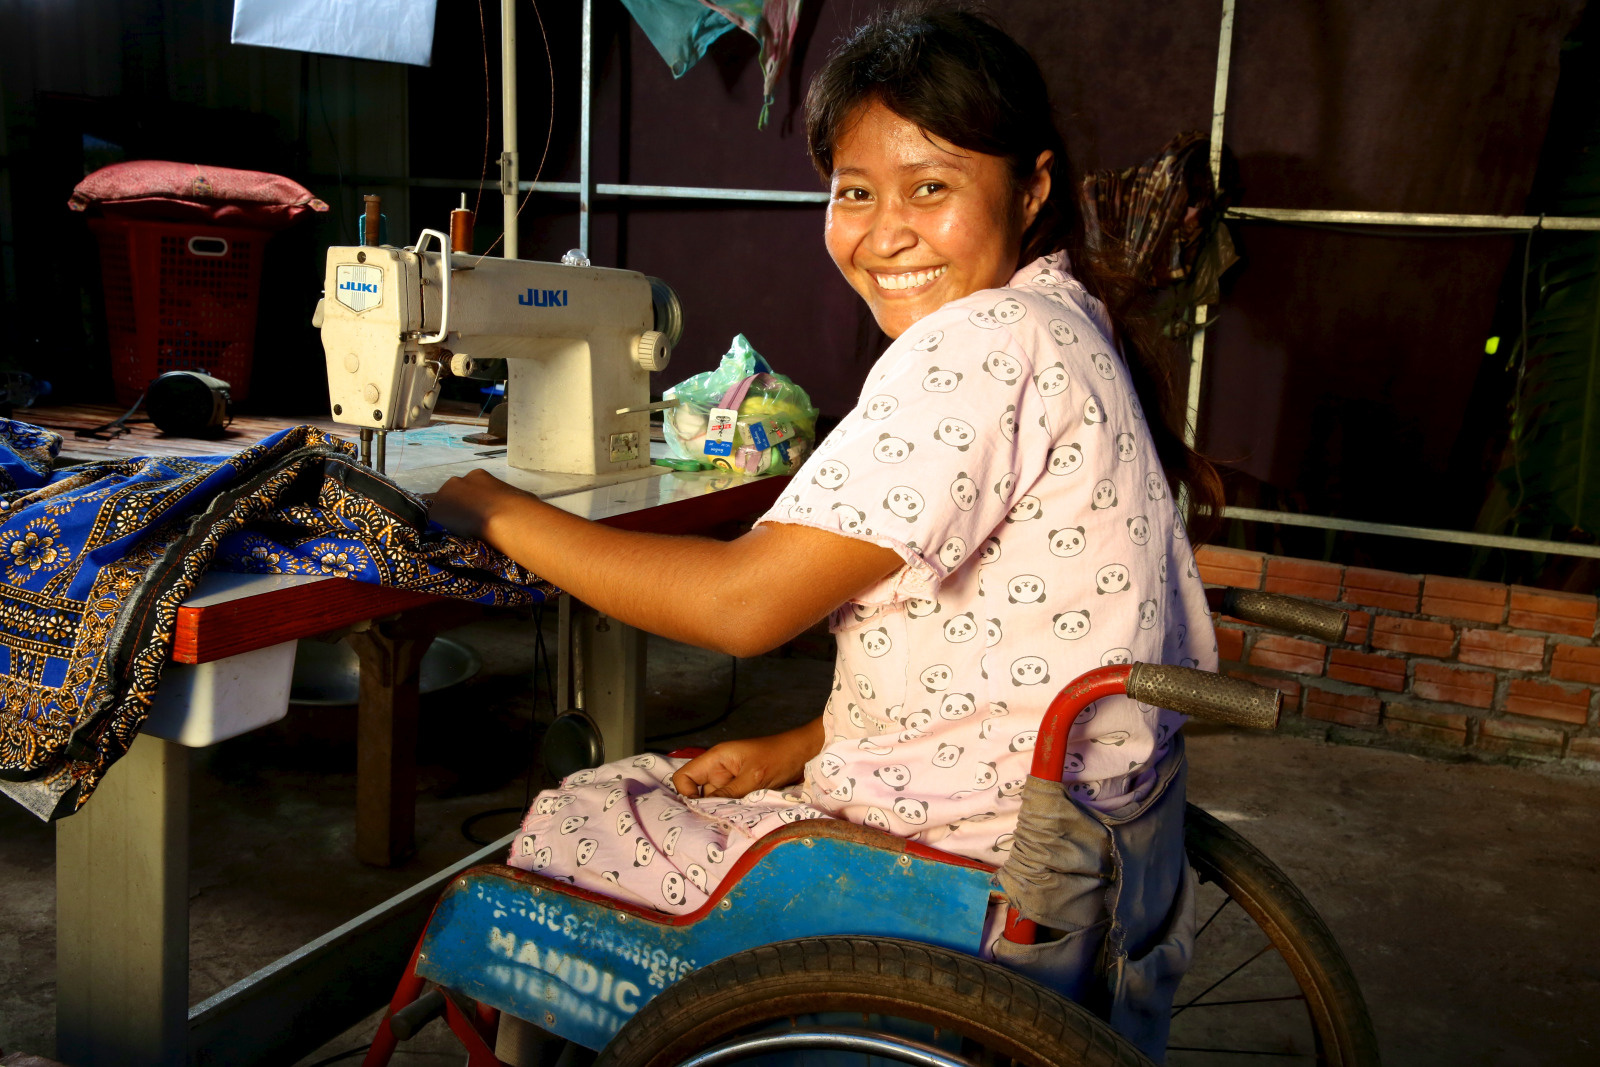 Srey Nuch has benefited from our rehabilitation services following an accident that cost her the use of her legs and from HI's socio-economic inclusion services. She is now able to walk with the help of orthotics and has started a small sewing business. © Stephen Rae/HI